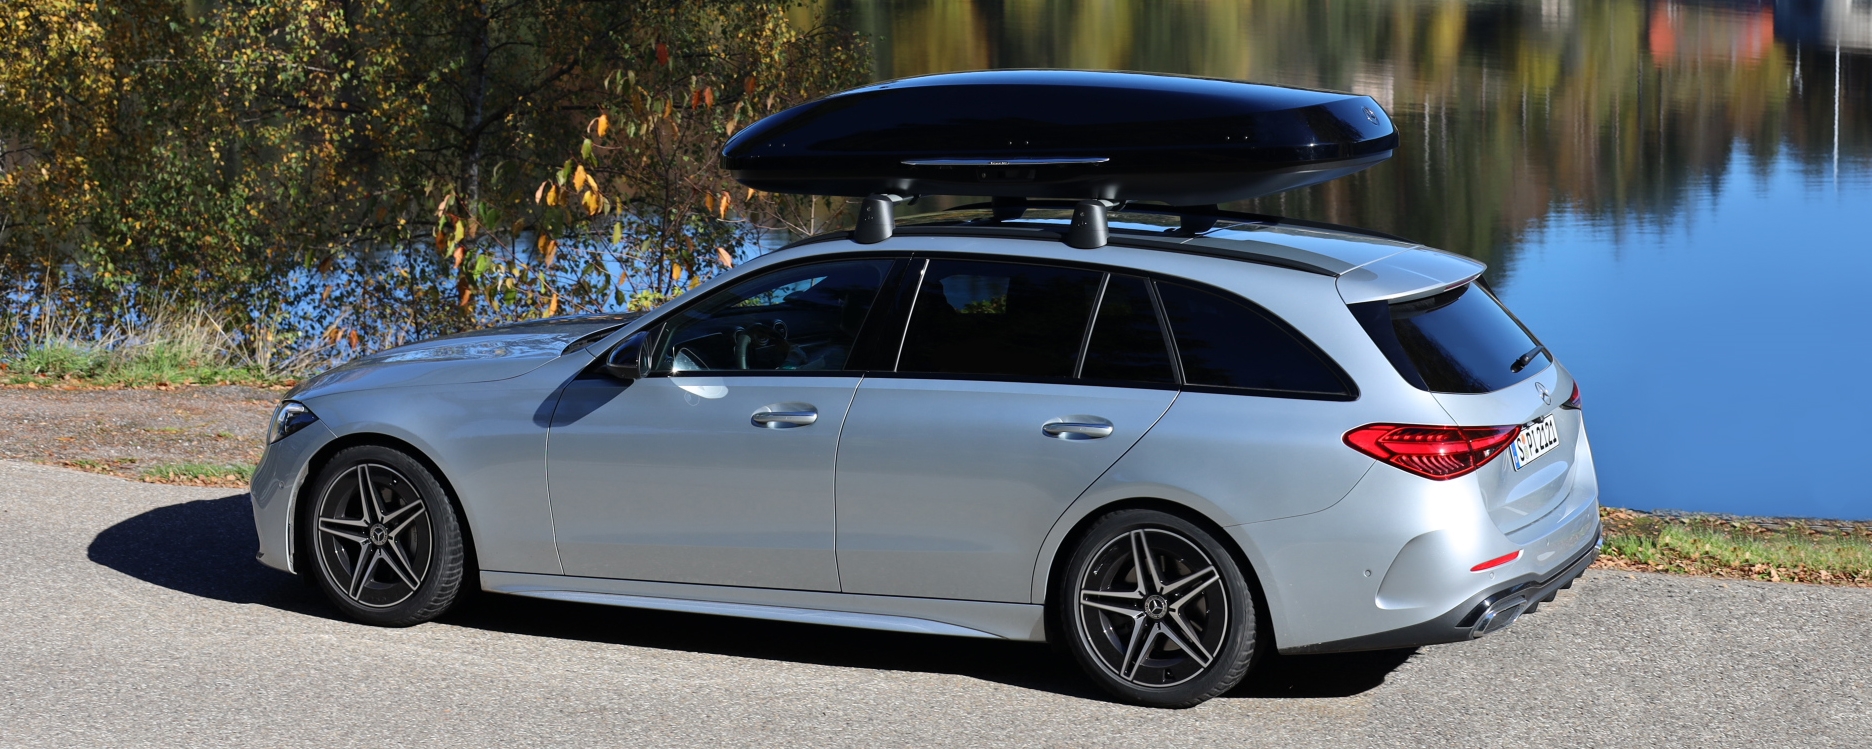 Mercedes-Benz Genuine Accessories | The new roof boxes from